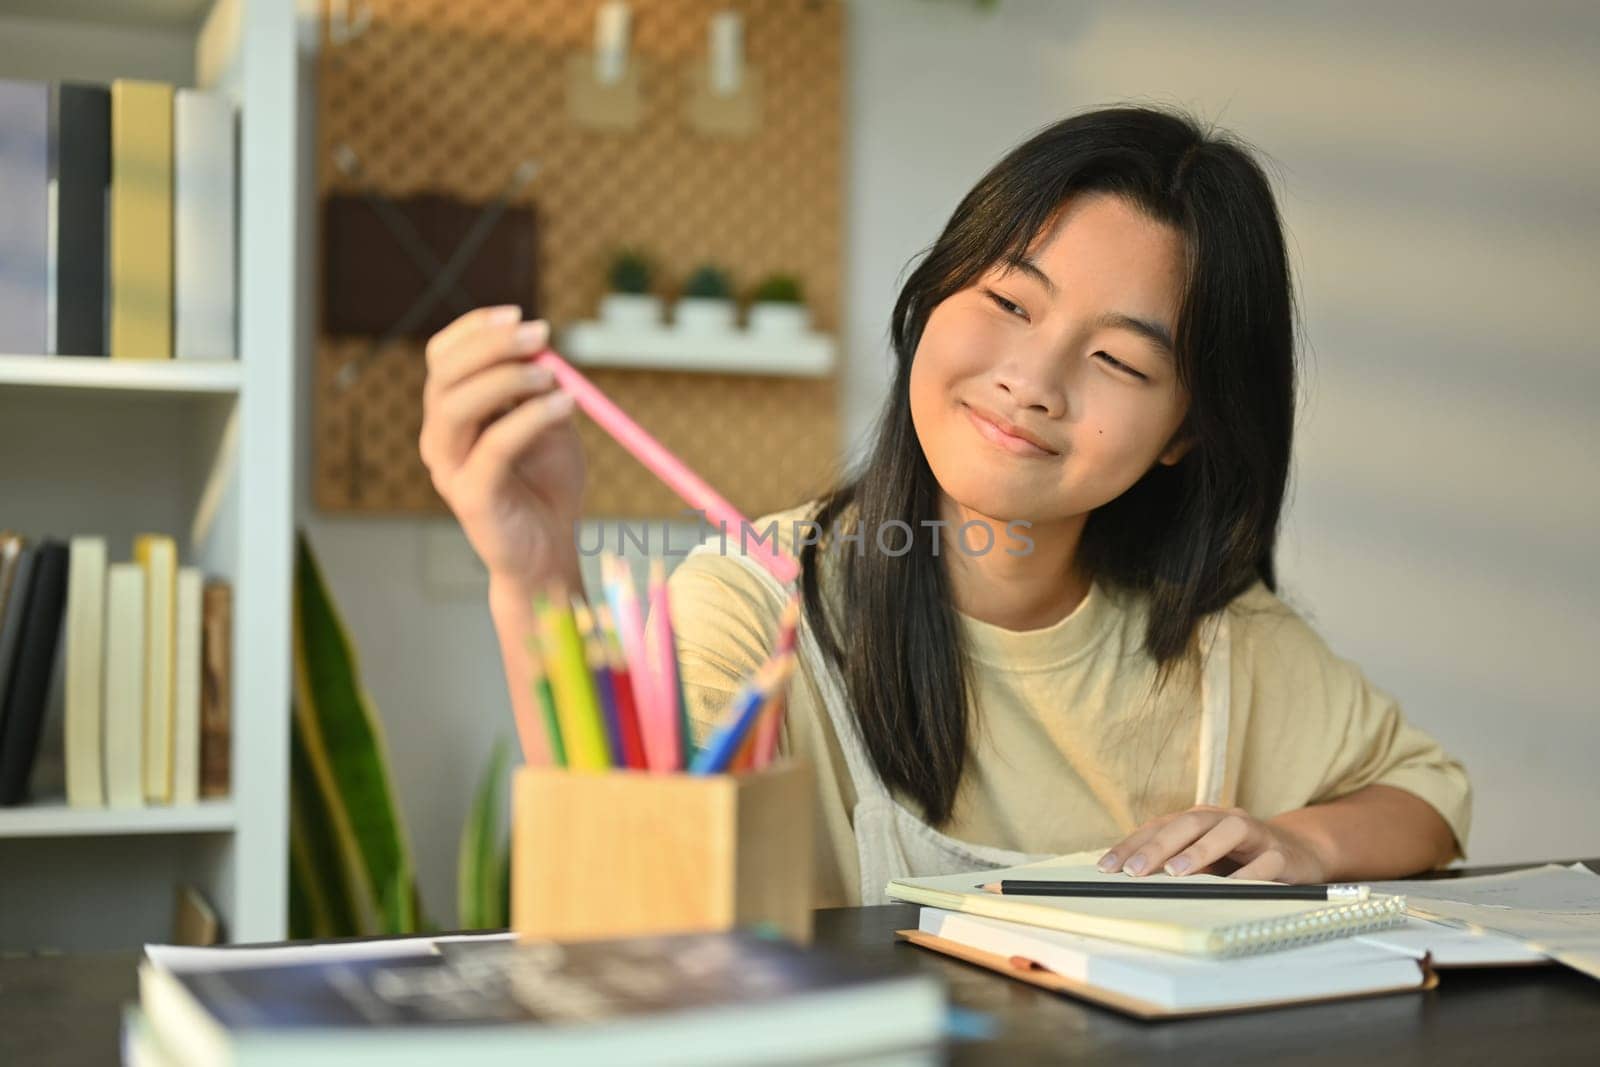 Cheerful teenaged girl doing homework, writing in notebook while sitting at table in living room by prathanchorruangsak